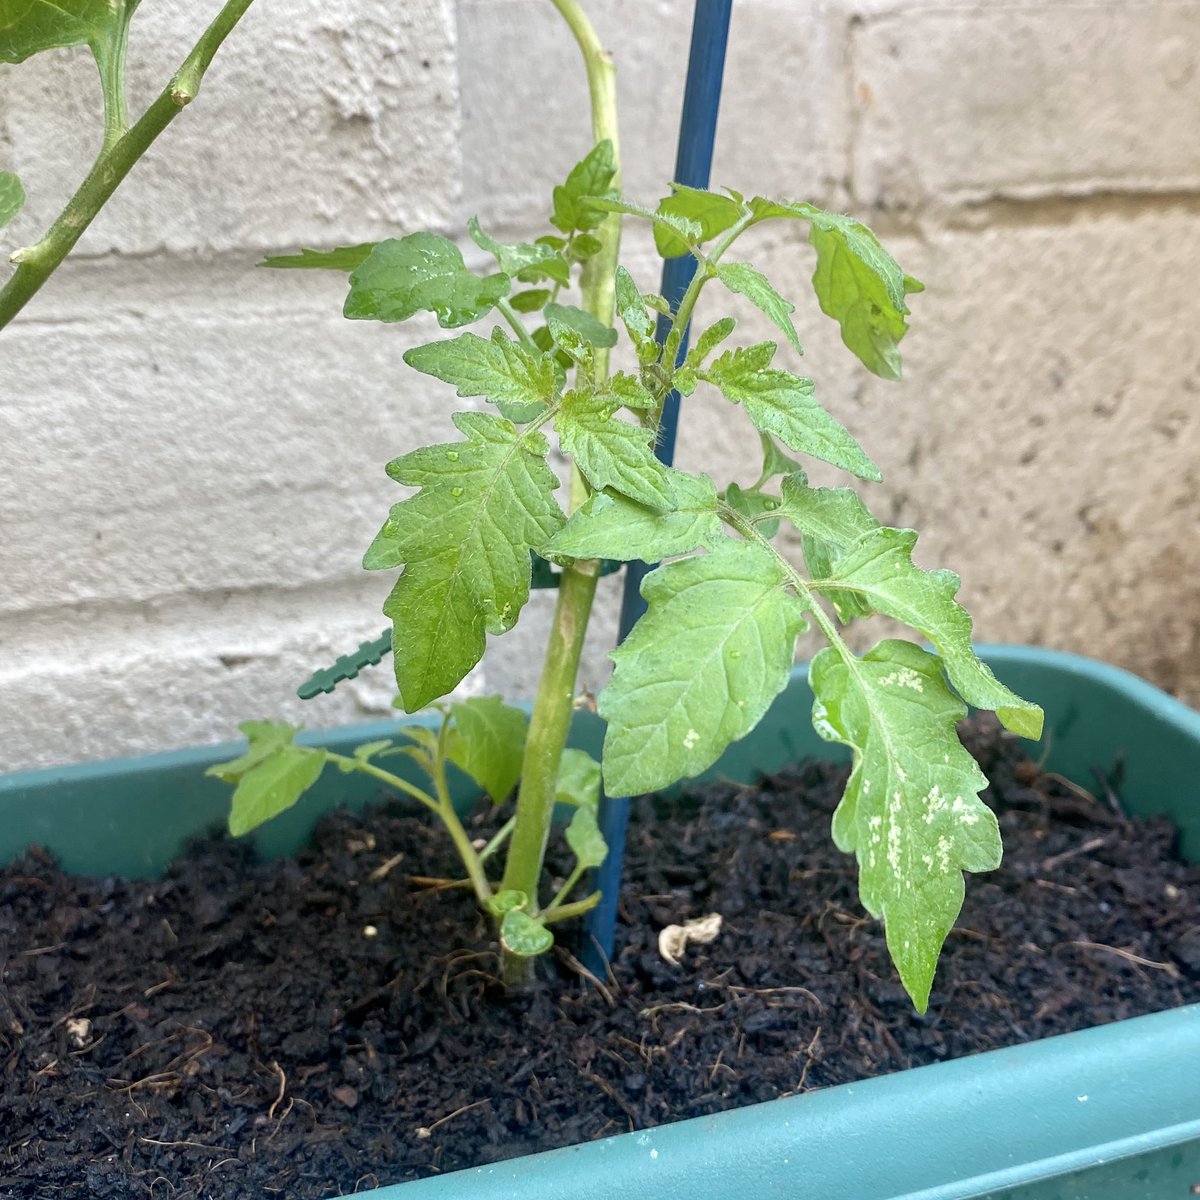 This dead stick of a tomato plant coming back to life!! https://twitter.com/theotherlivvy/status/1266057488350273538?s=21  https://twitter.com/theotherlivvy/status/1266057488350273538